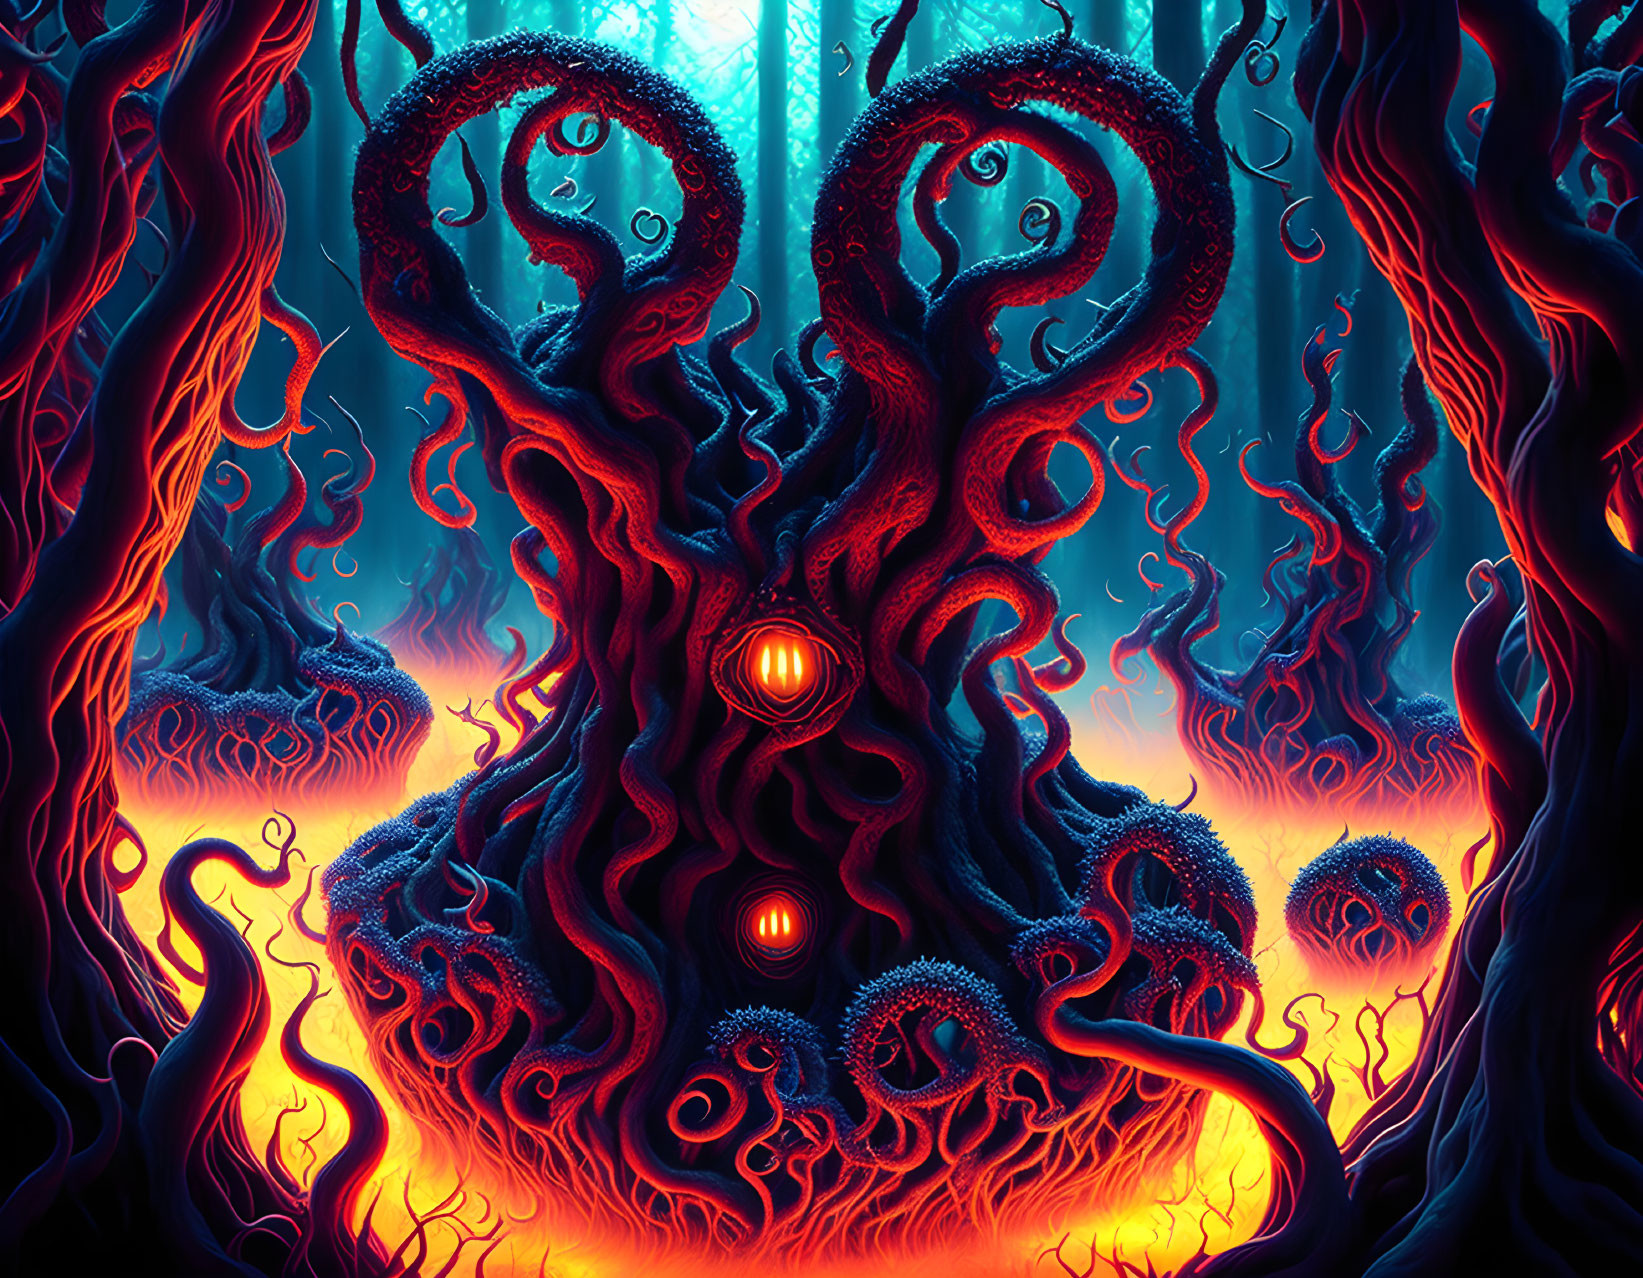 Colorful surreal illustration: Glowing-eyed octopus creature in neon-lit forest